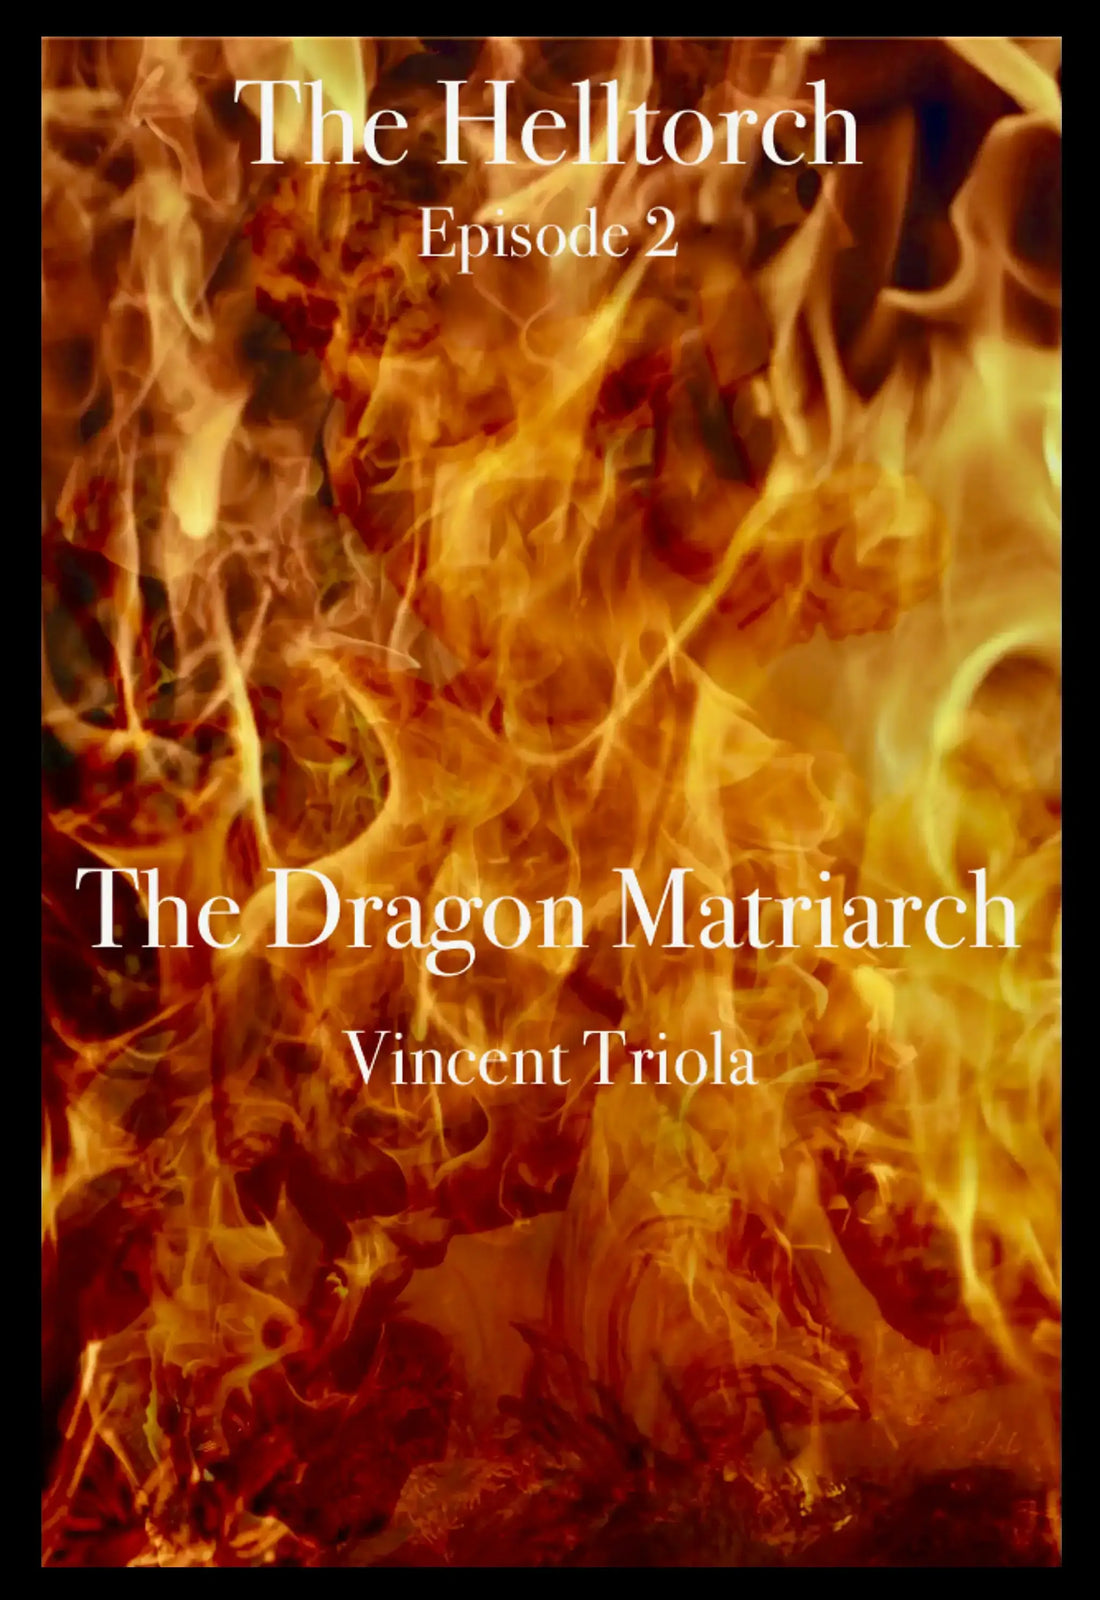 The Dragon Matriarch Episode 2 of the Helltorch Series